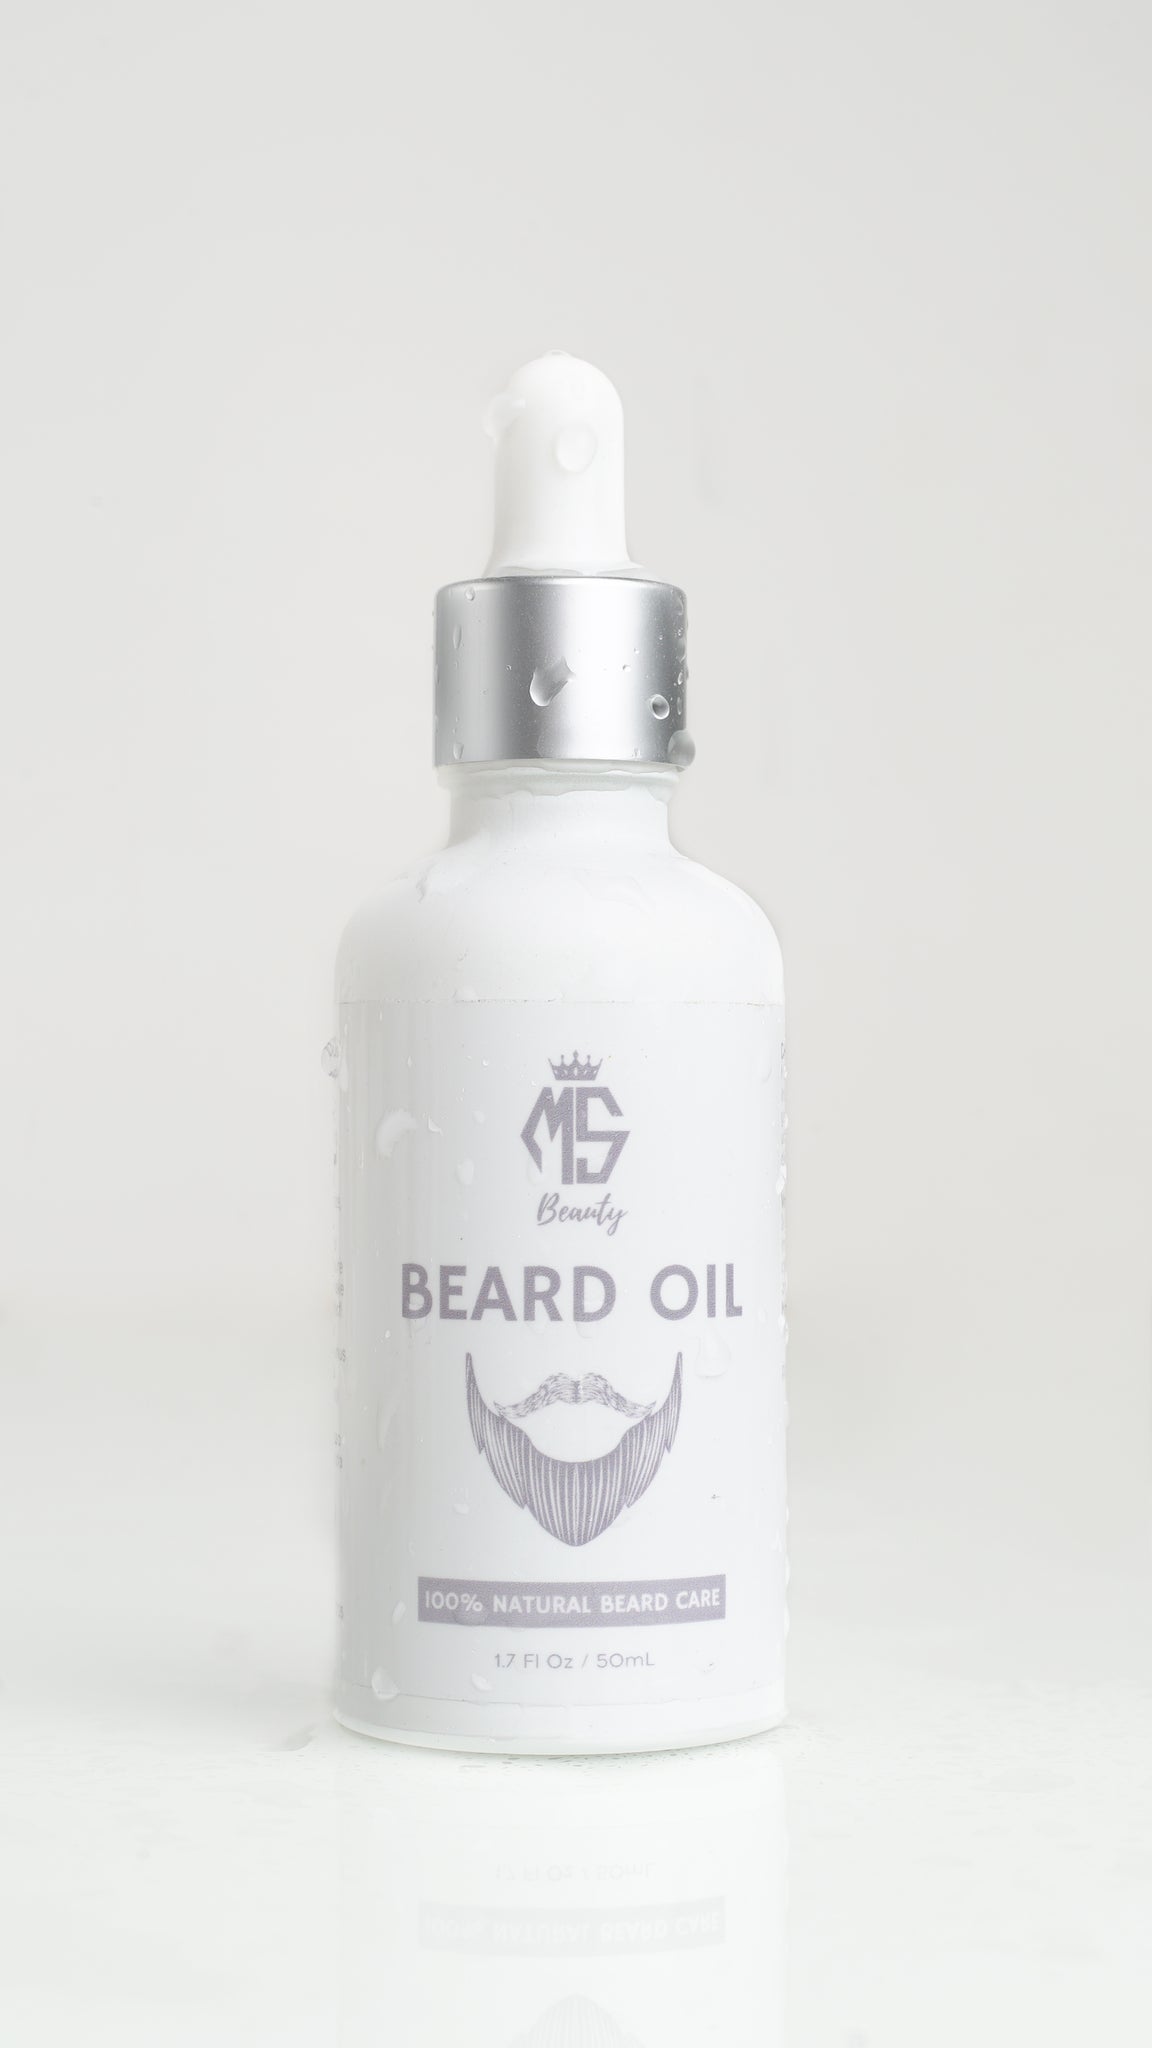 Moroccansoulbeauty, Beard oil, natural, fuller beard, thicker beard, patchy beard, healthy beard growth, essential oils, vitamins, nourish skin, stimulate hair growth, gentle, no harsh chemicals, daily use, fast results.